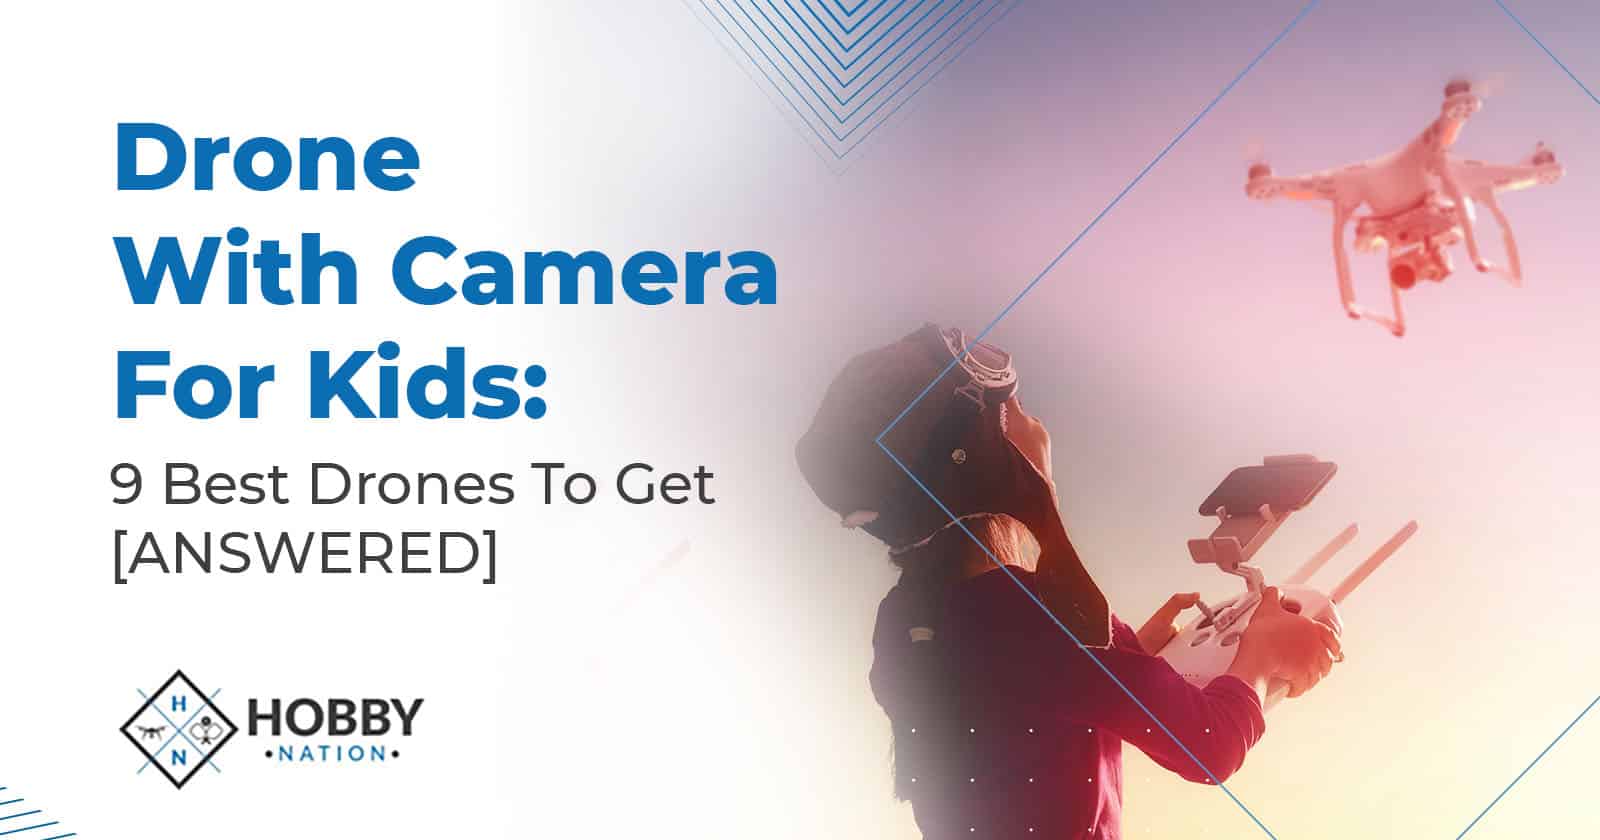 Drones With Camera For Kids: 9 Best Drones To Get